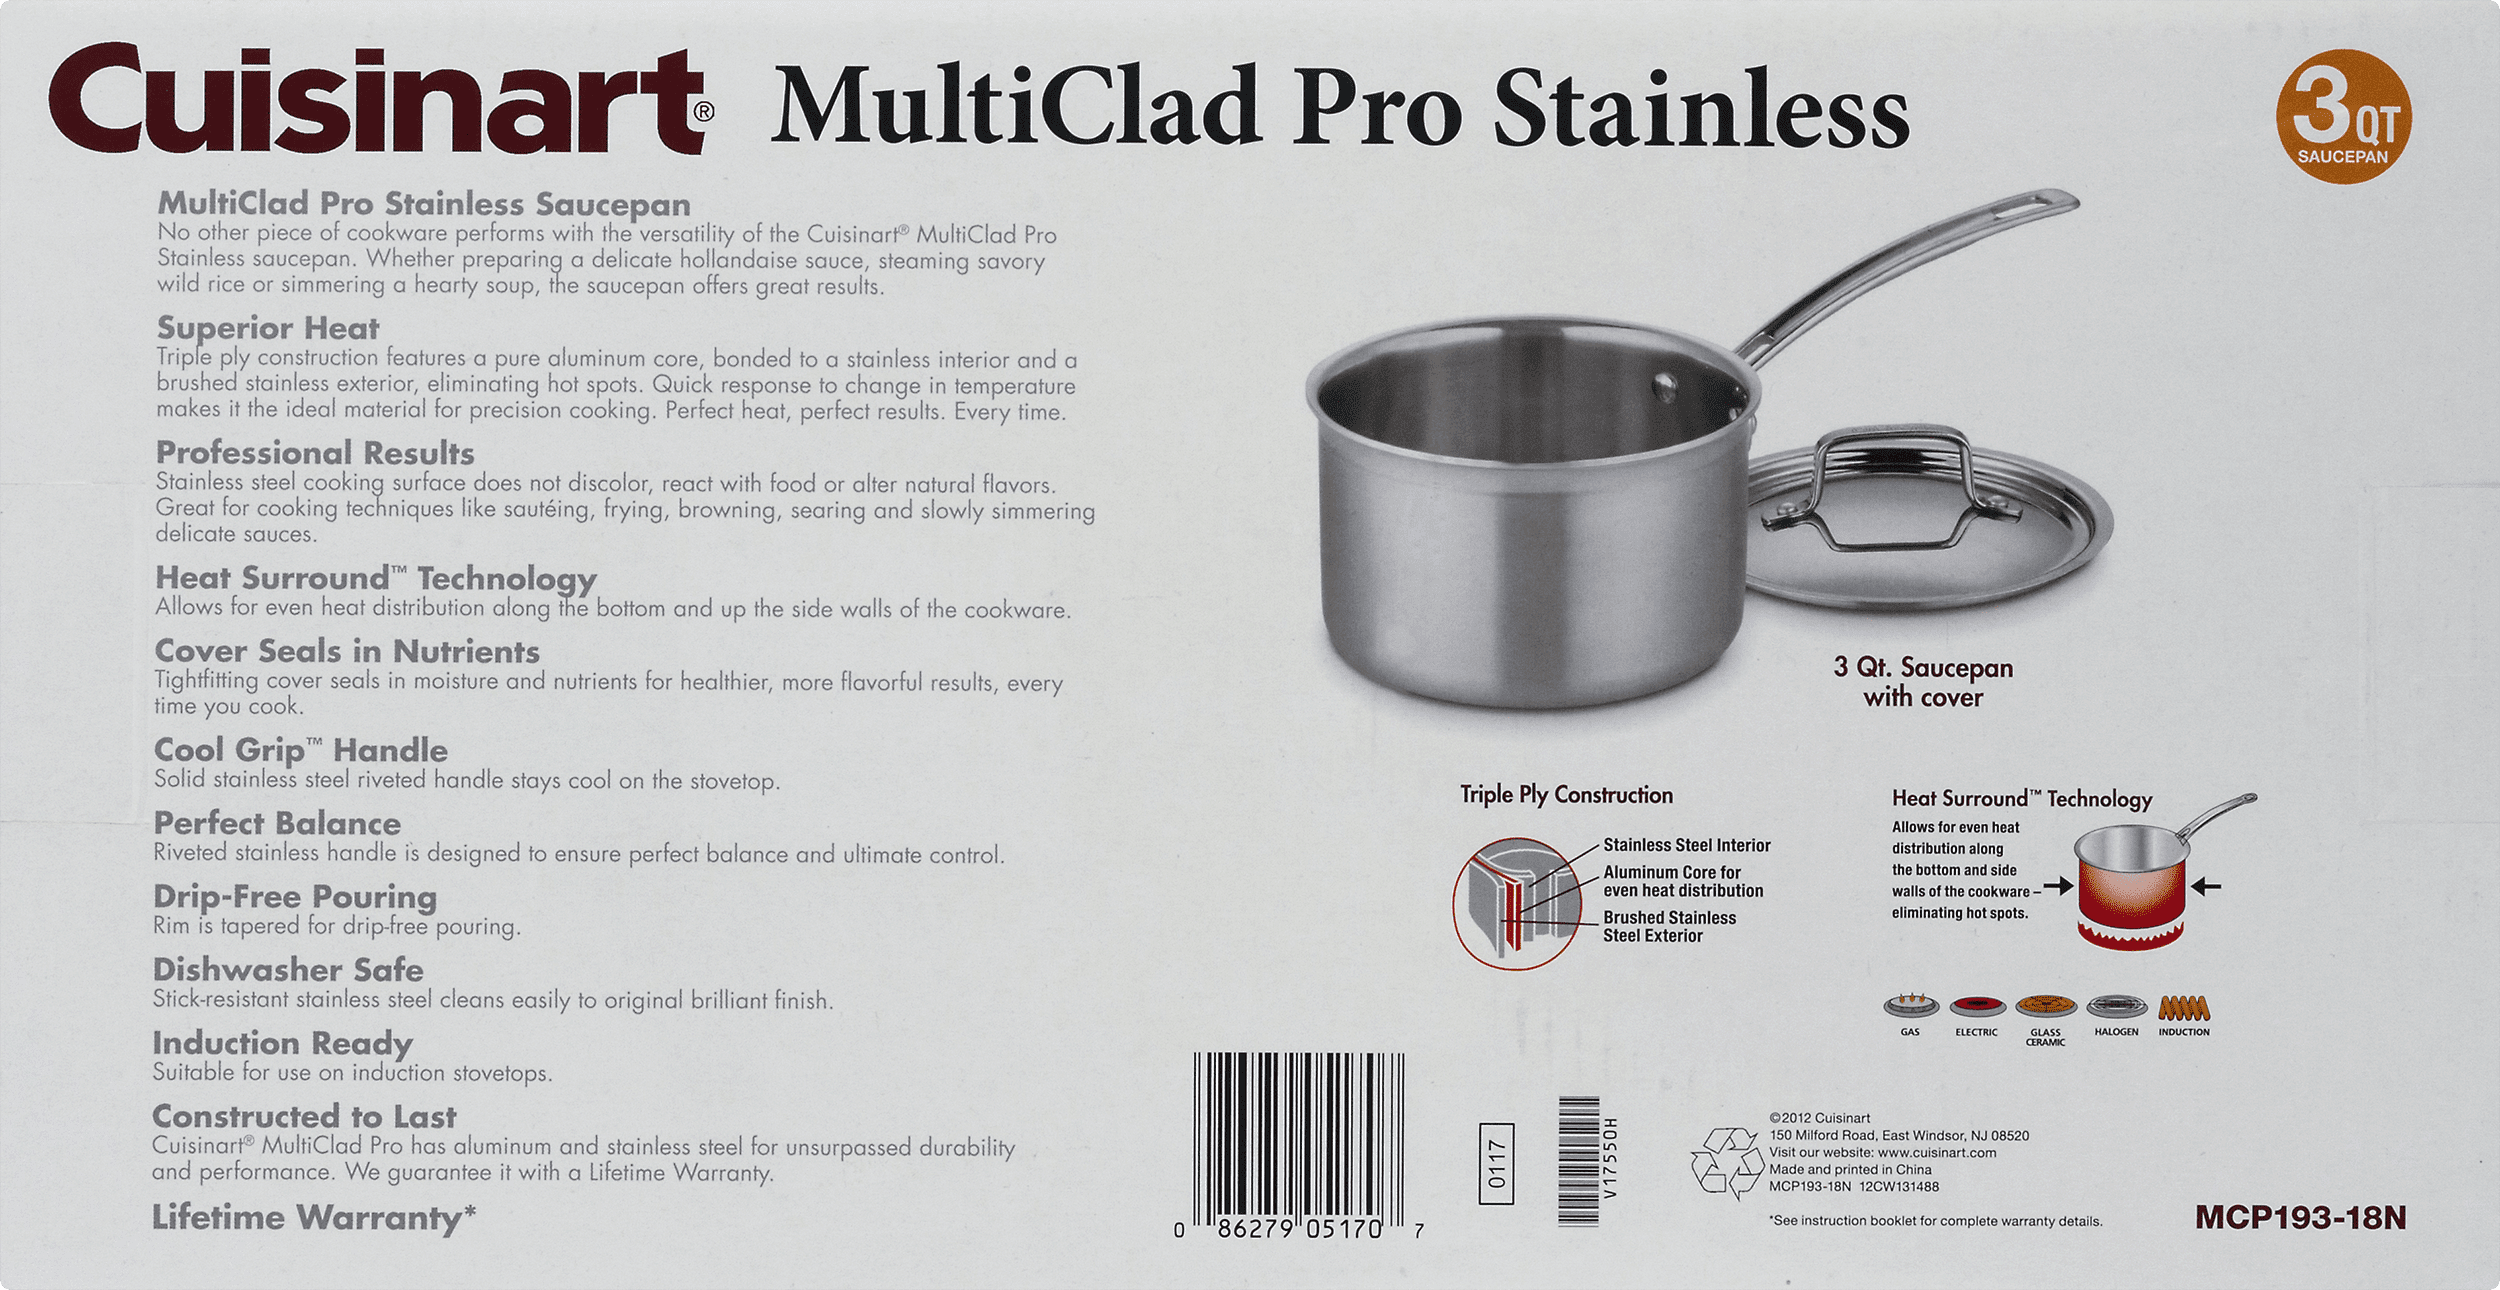 Cuisinart Mcp193-18n MultiClad Pro Stainless Steel 3-Quart Saucepan with Cover